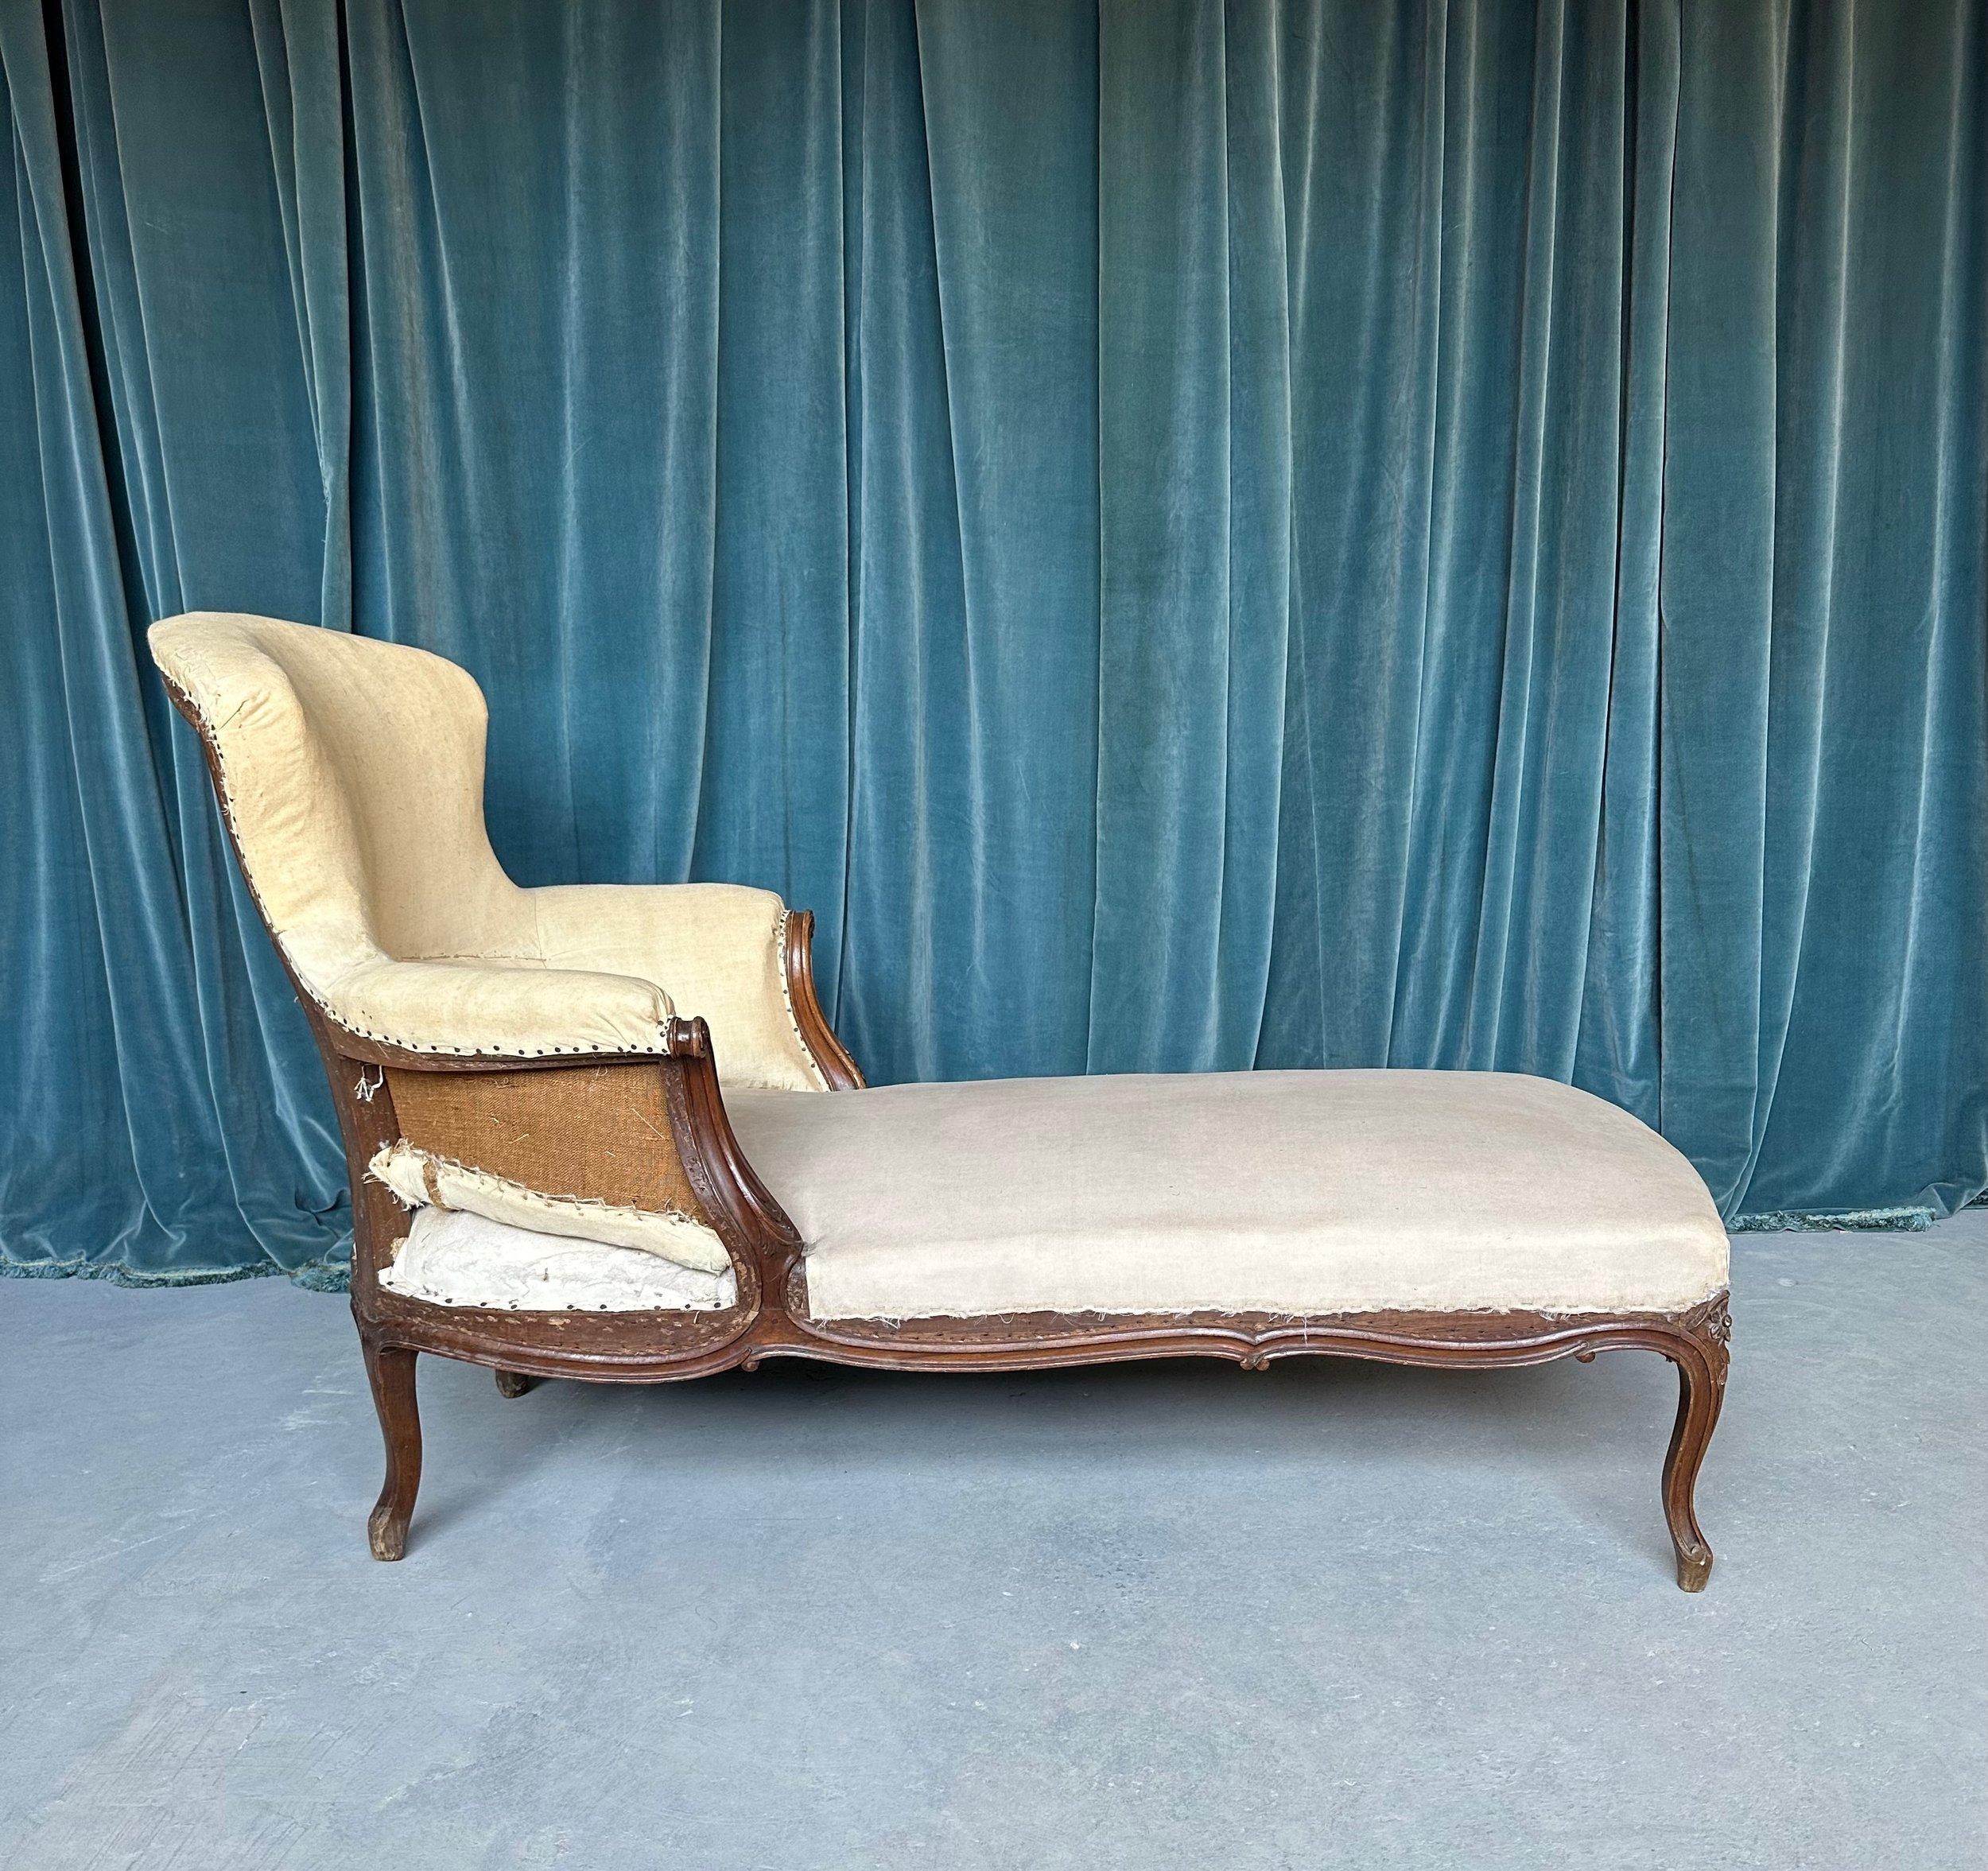 French 19th C. Chaise Longue with Carved Fruitwood Frame In Good Condition For Sale In Buchanan, NY